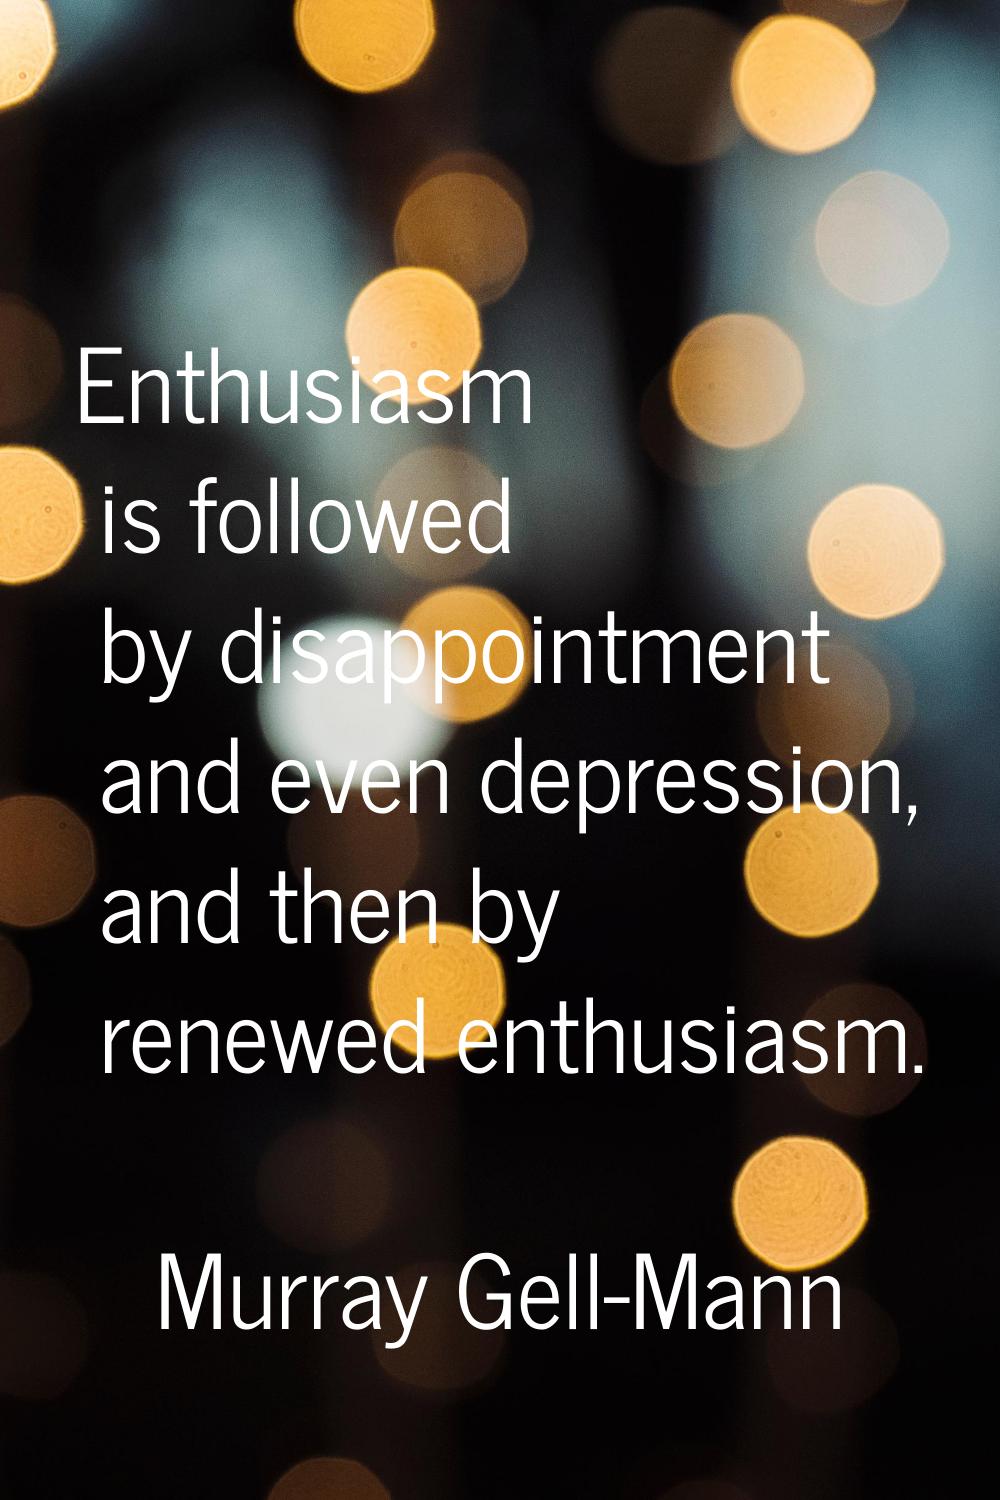 Enthusiasm is followed by disappointment and even depression, and then by renewed enthusiasm.